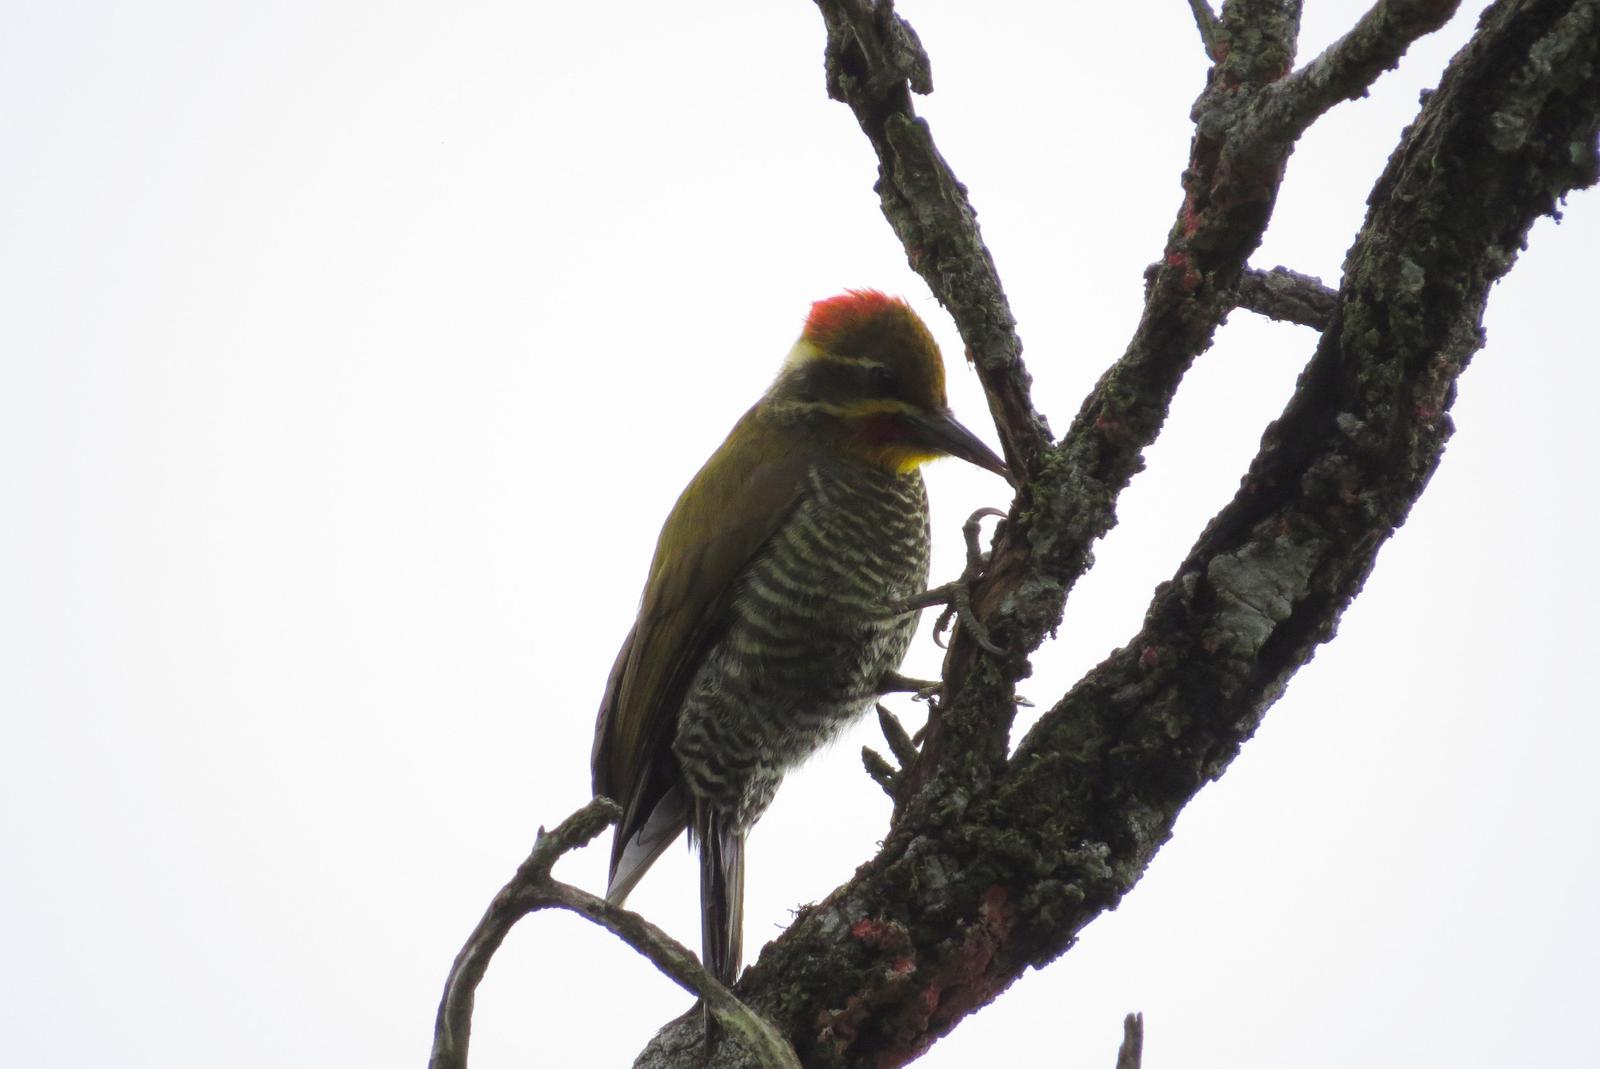 White-browed Woodpecker Photo by Jeff Harding